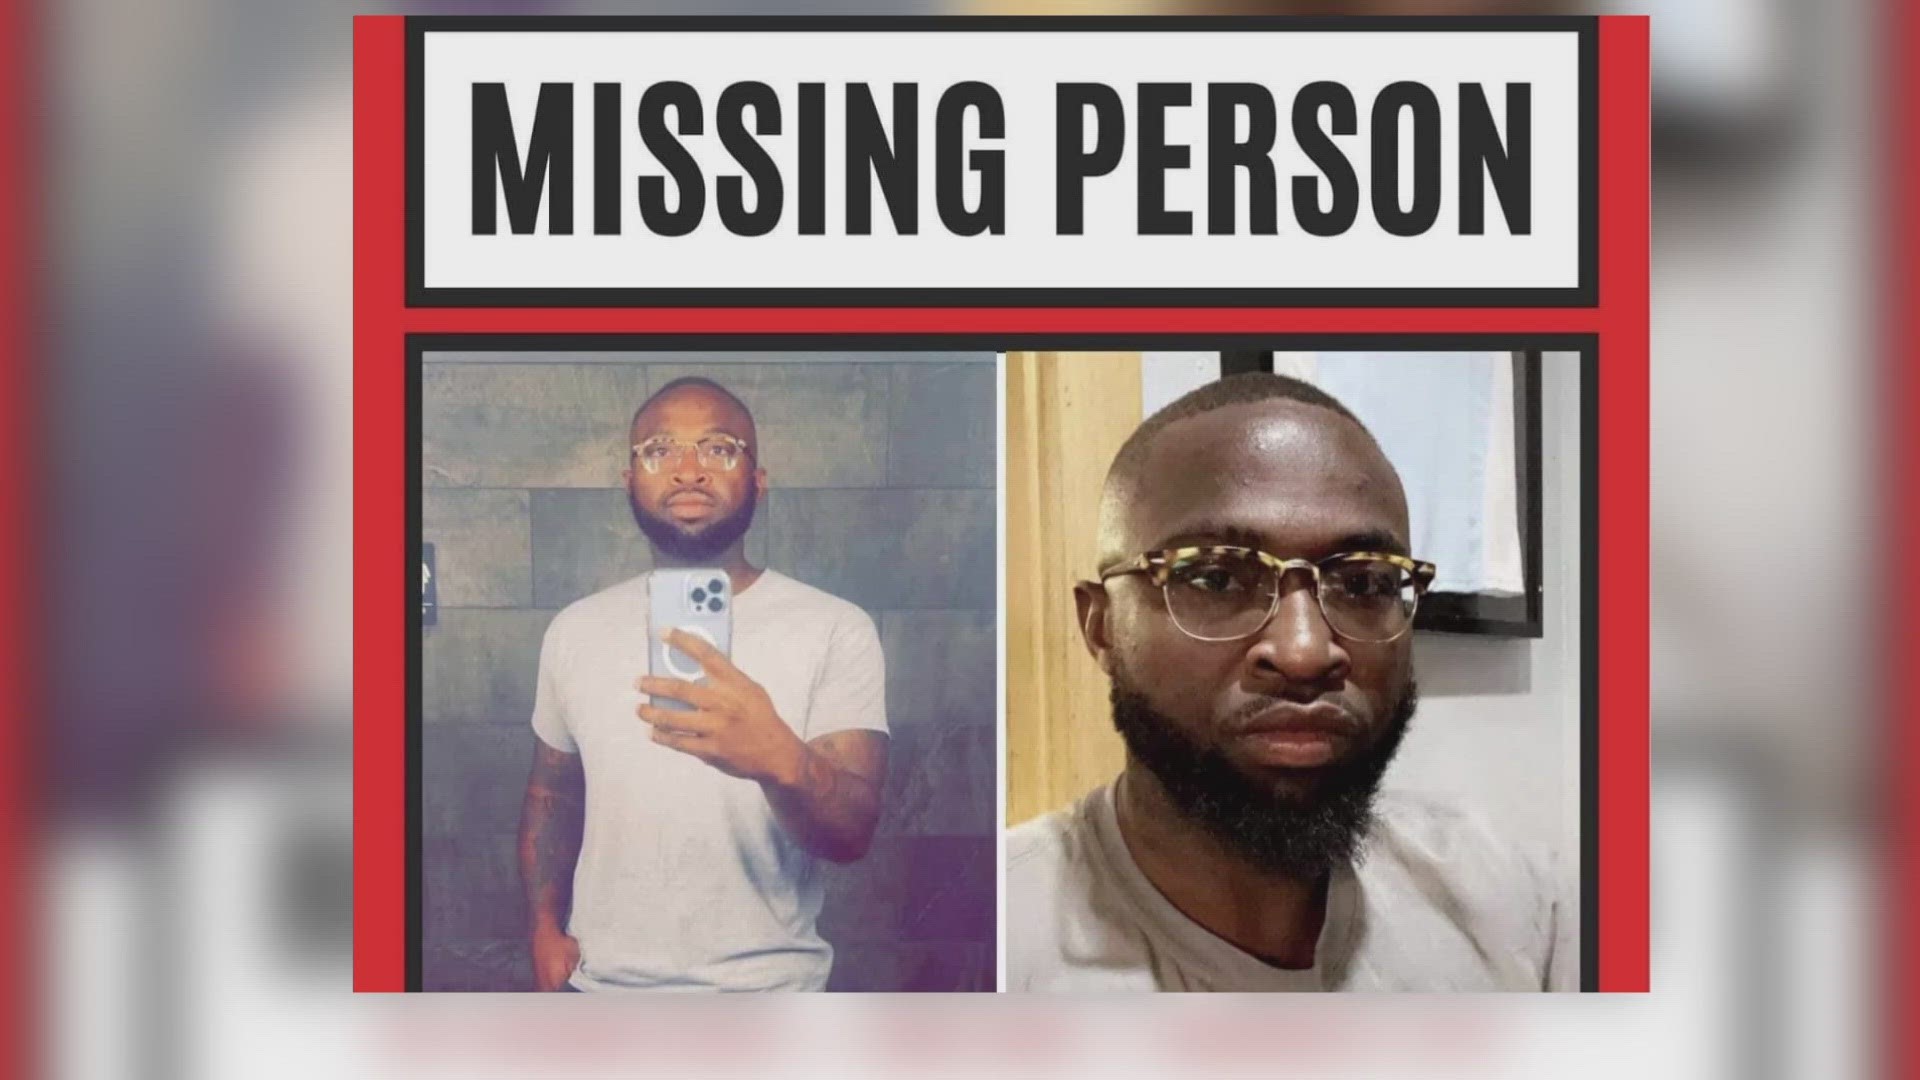 38-year-old Ronald Gene Smith was last seen in Stanton, TX. He goes by Ron and has tattoo sleeves on both arms. He has brown eyes and black hair.